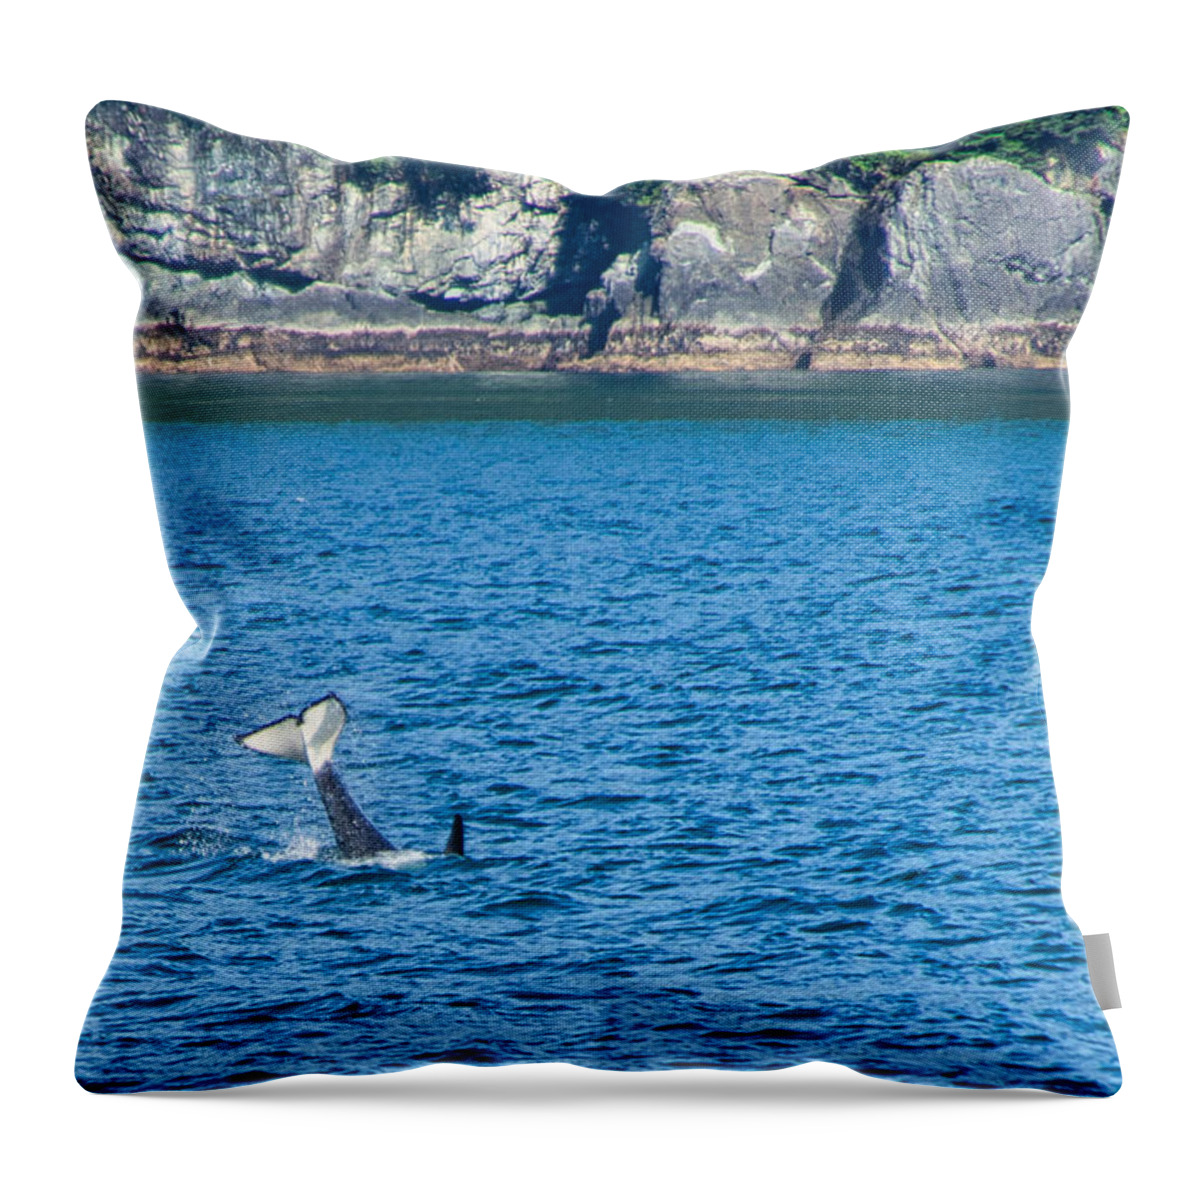 Orca Throw Pillow featuring the photograph Whale Tail by Steph Gabler